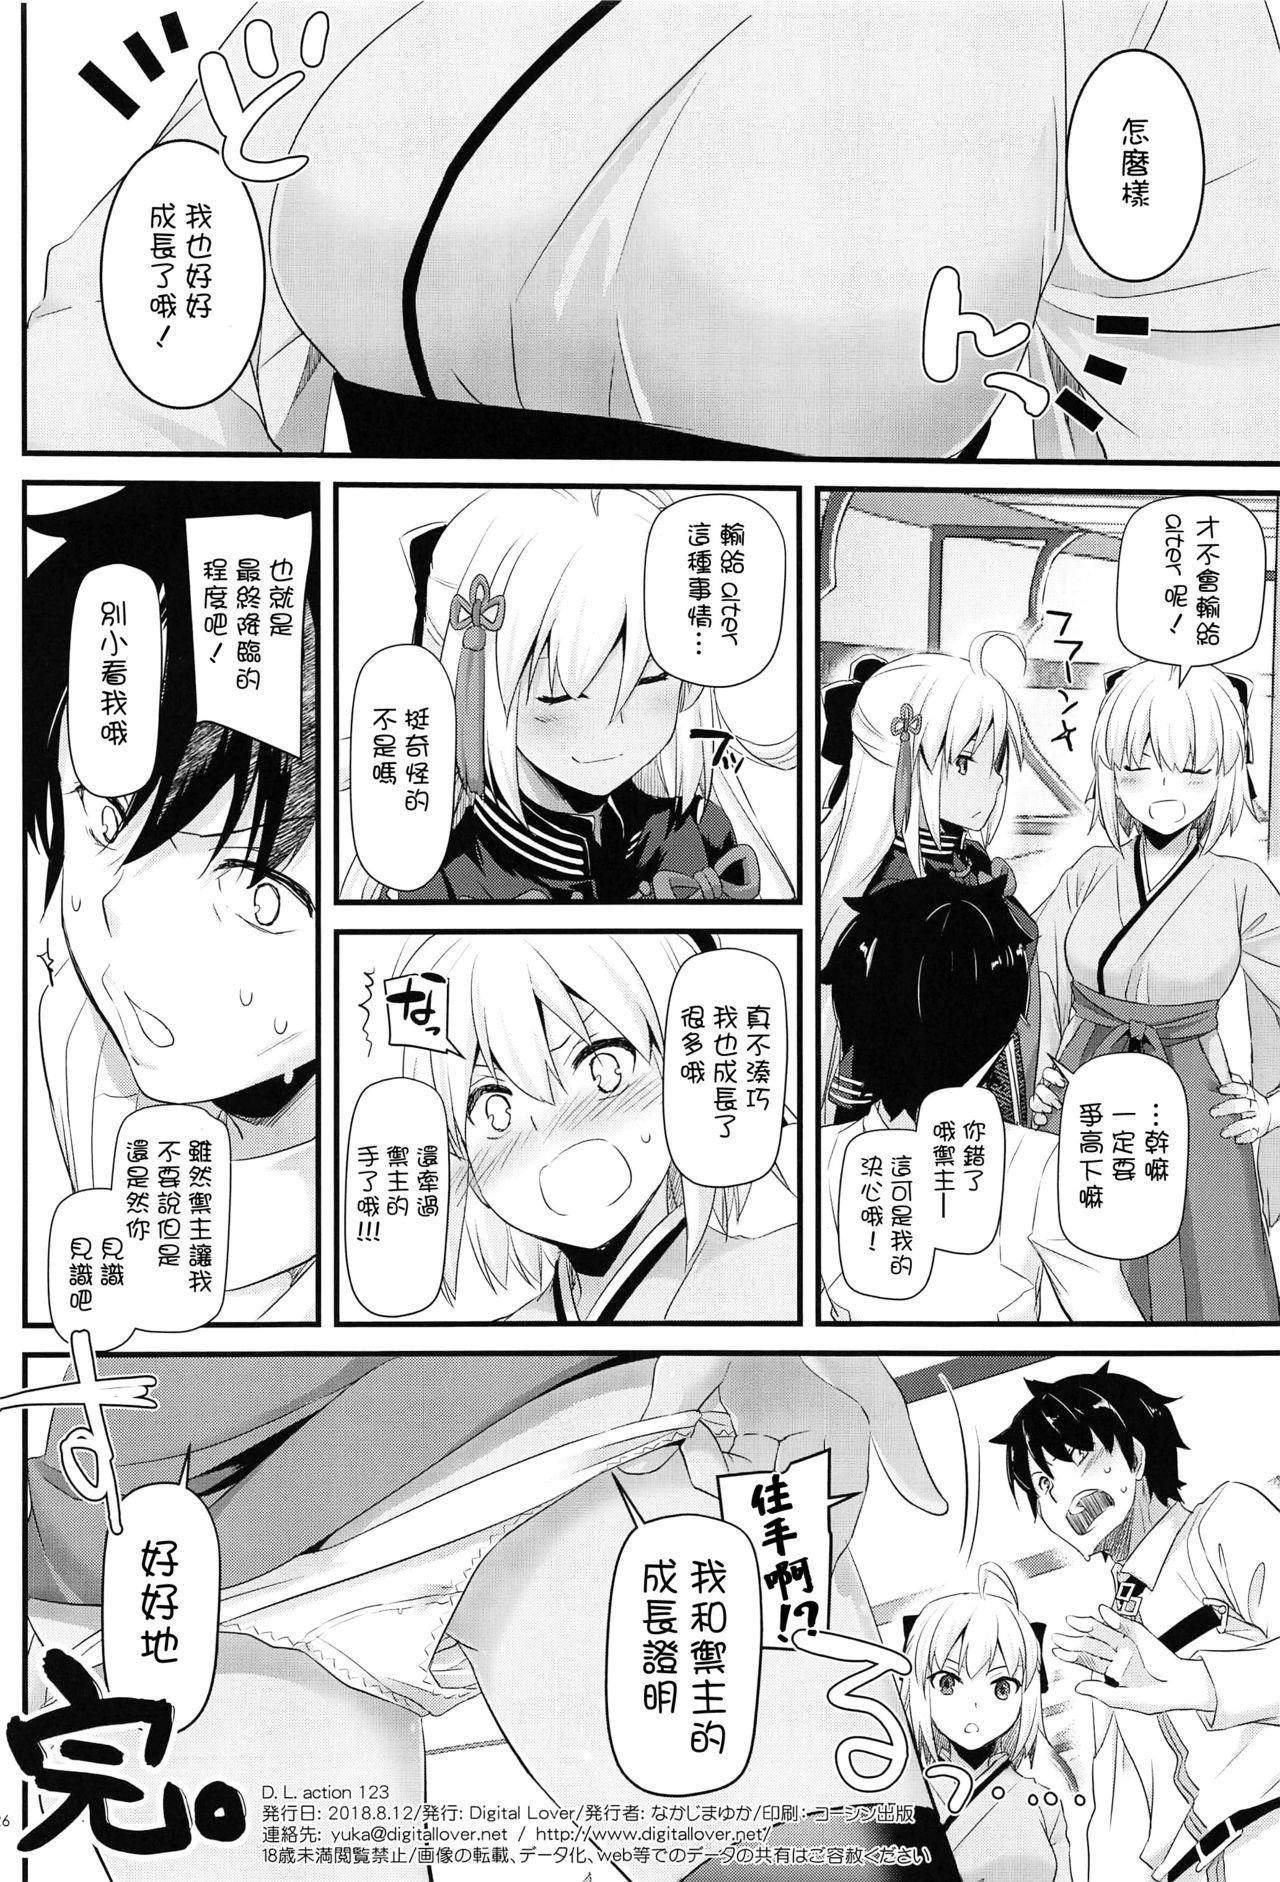 Shaking D.L. action 123 - Fate grand order Cum Inside - Page 26